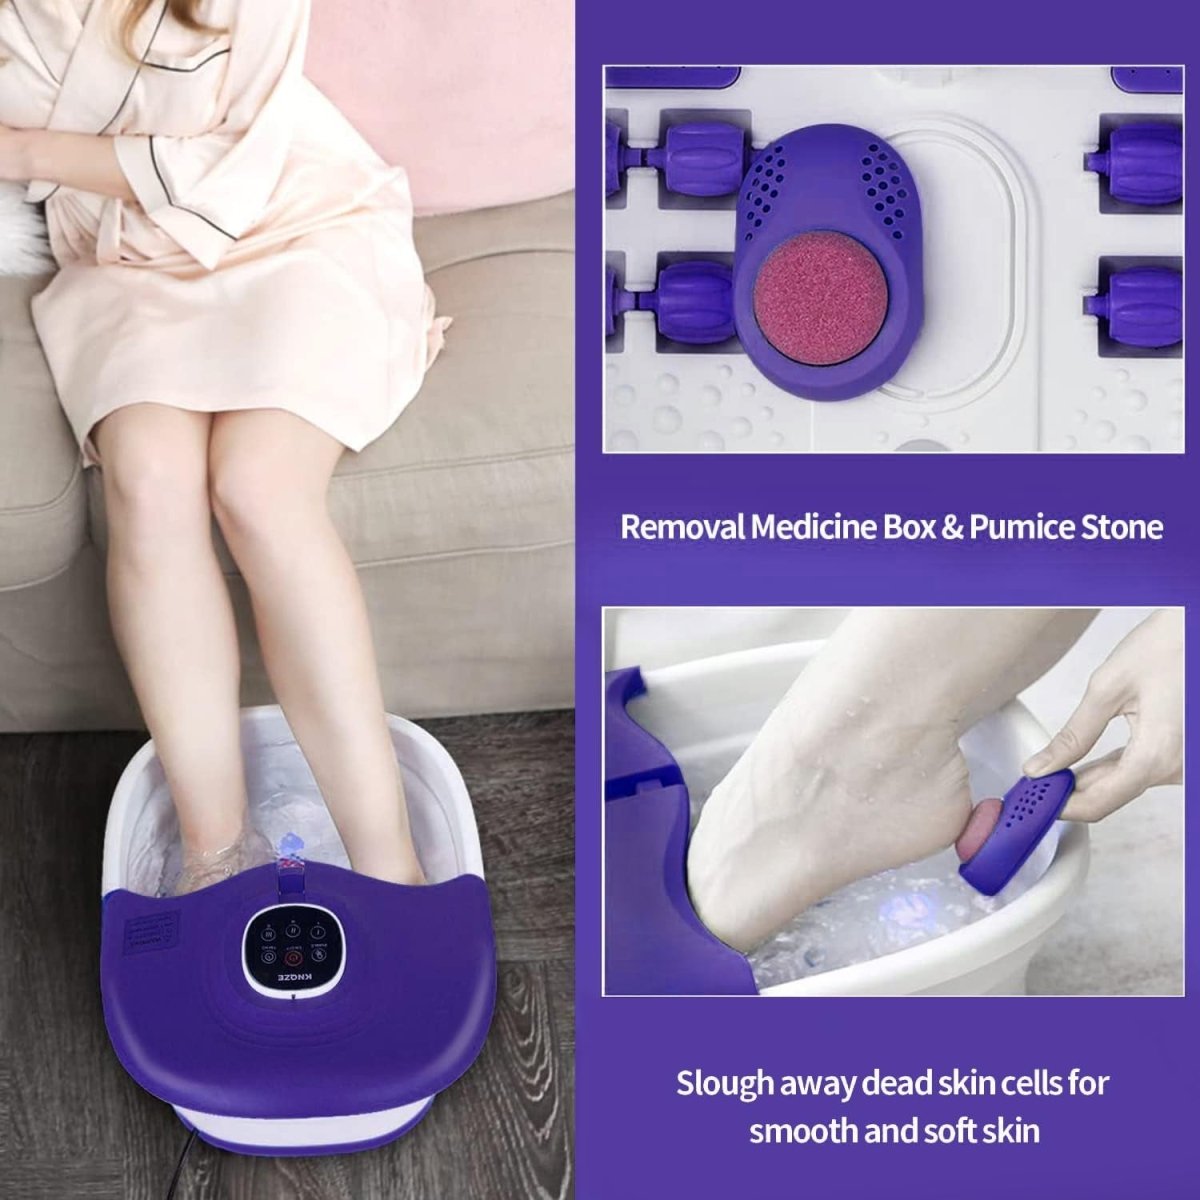 Collapsible Foot Bath with Heat, Remote Control, Temperature Control, Bubbles, Pumice Stone, Red Light, Timer, 16 Massage Roller Pedicure - Shiny Nails